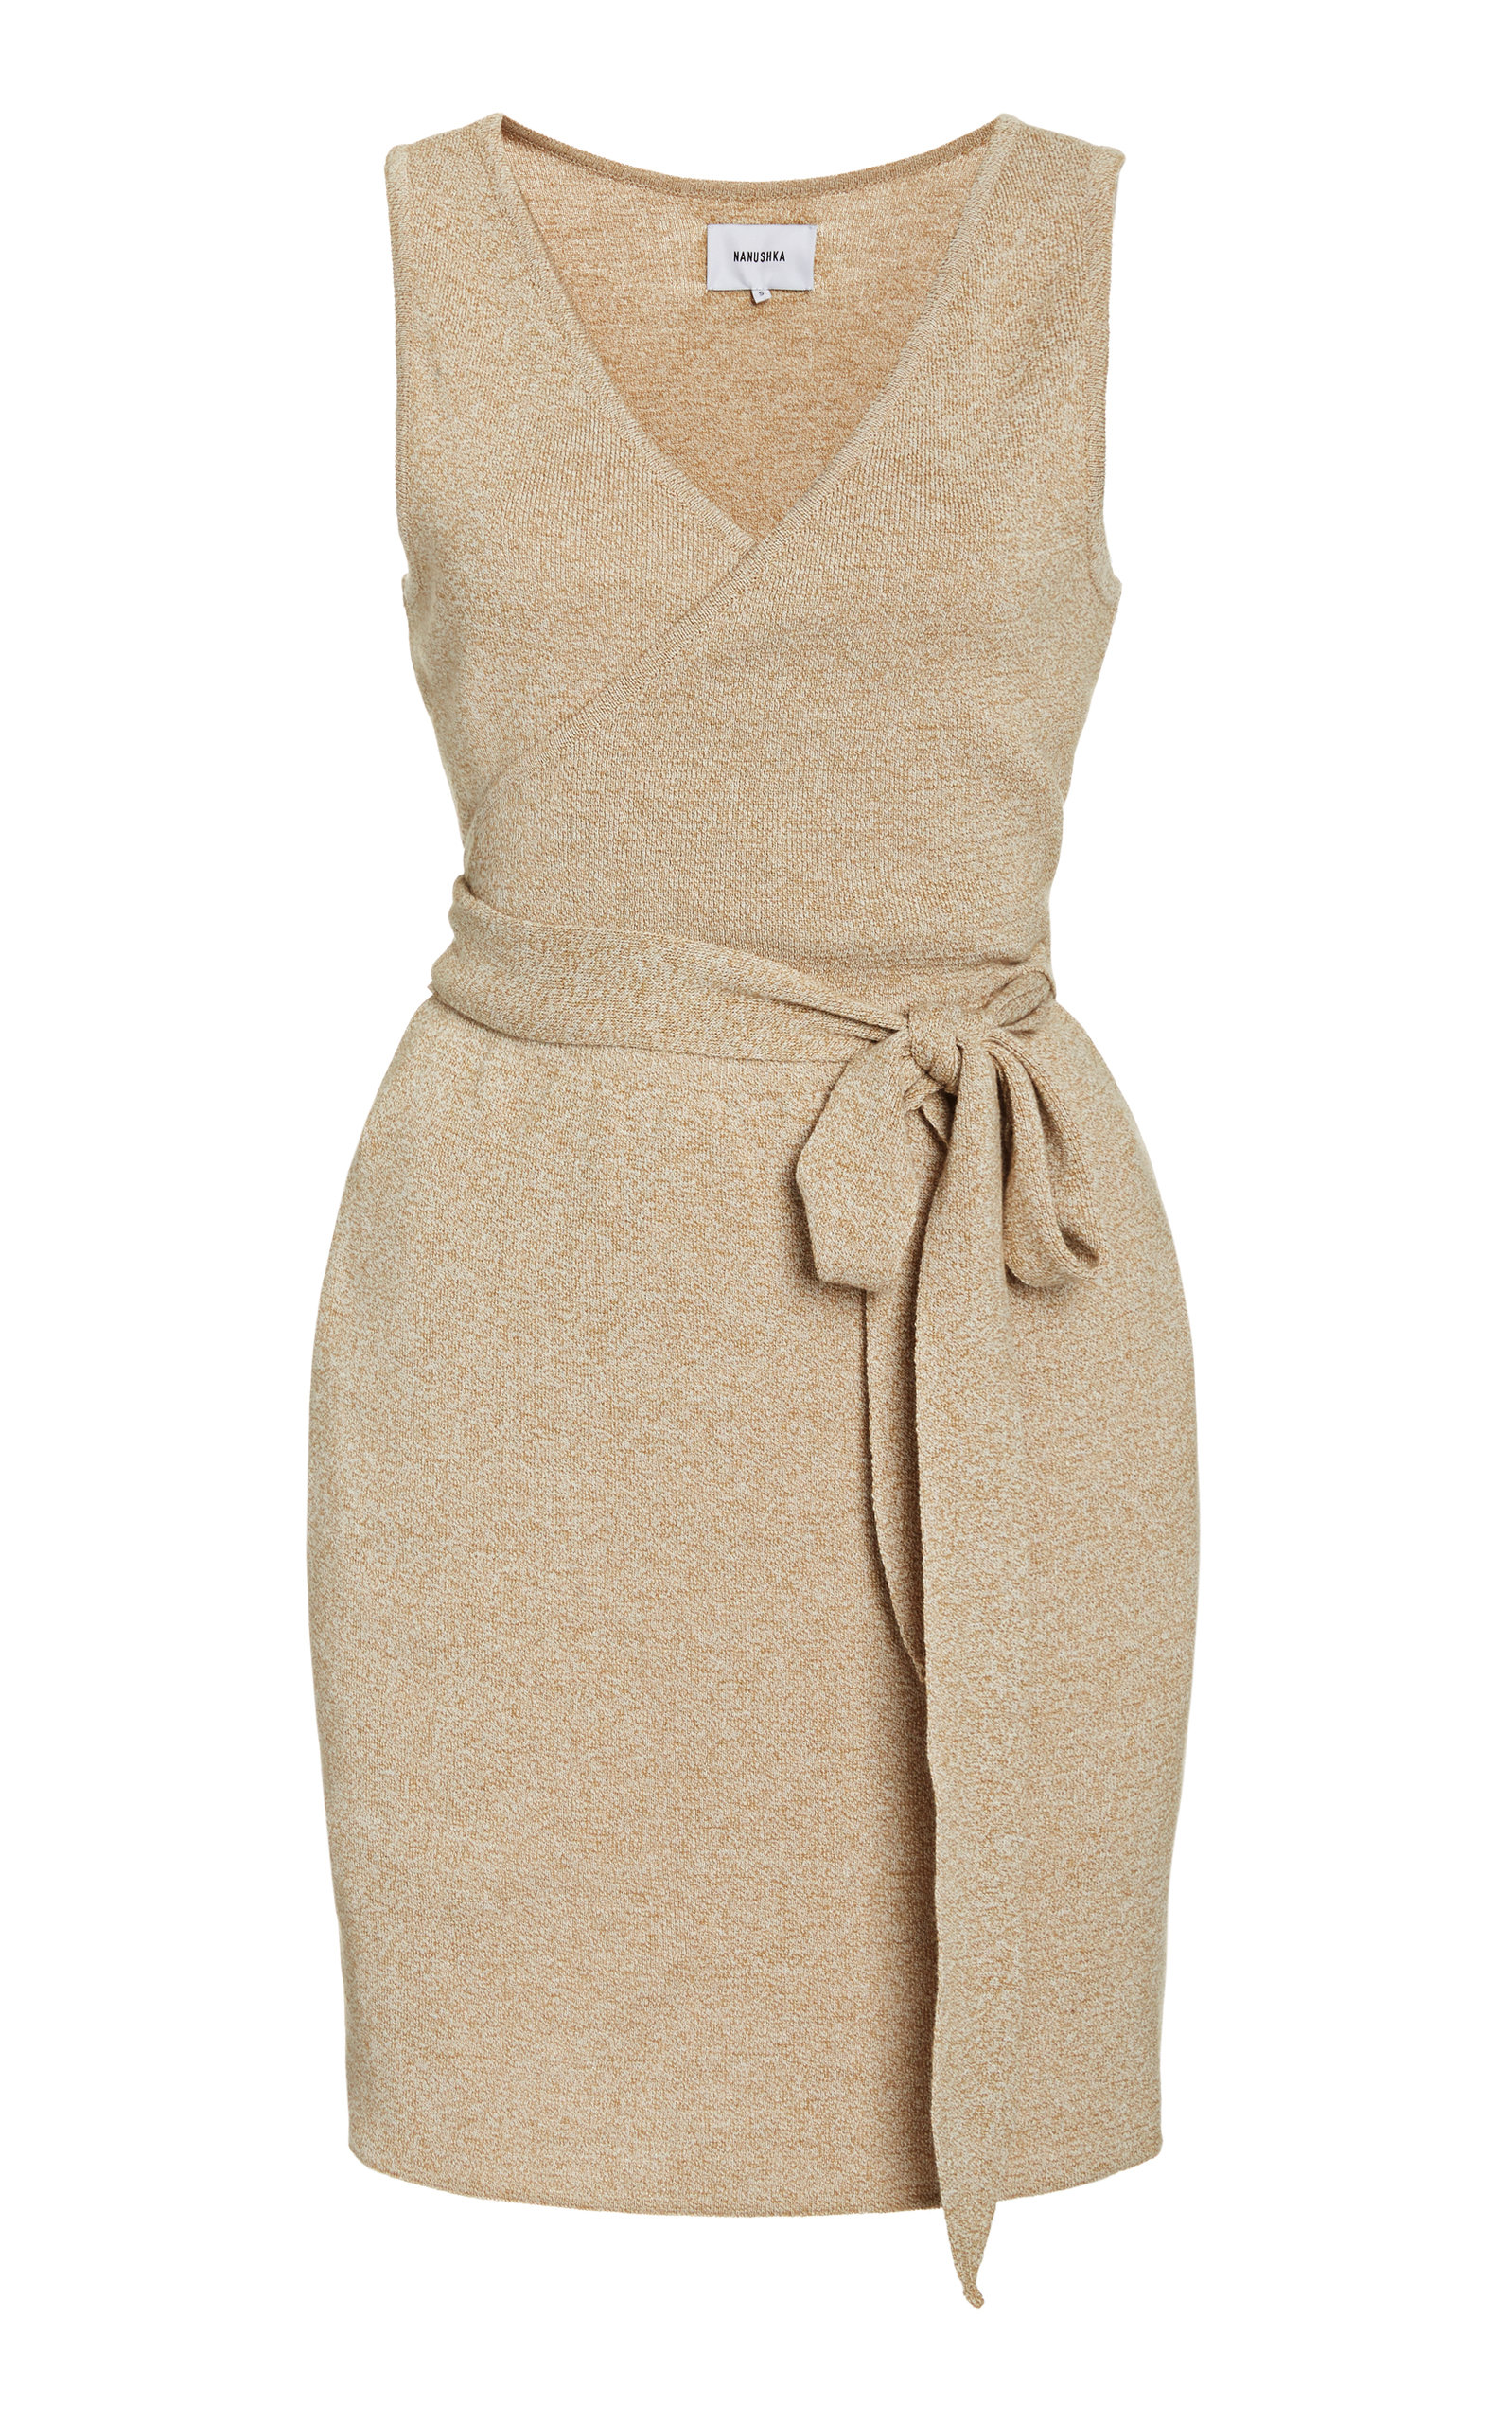 The 24 Best Wrap Dresses to Add to Your ...